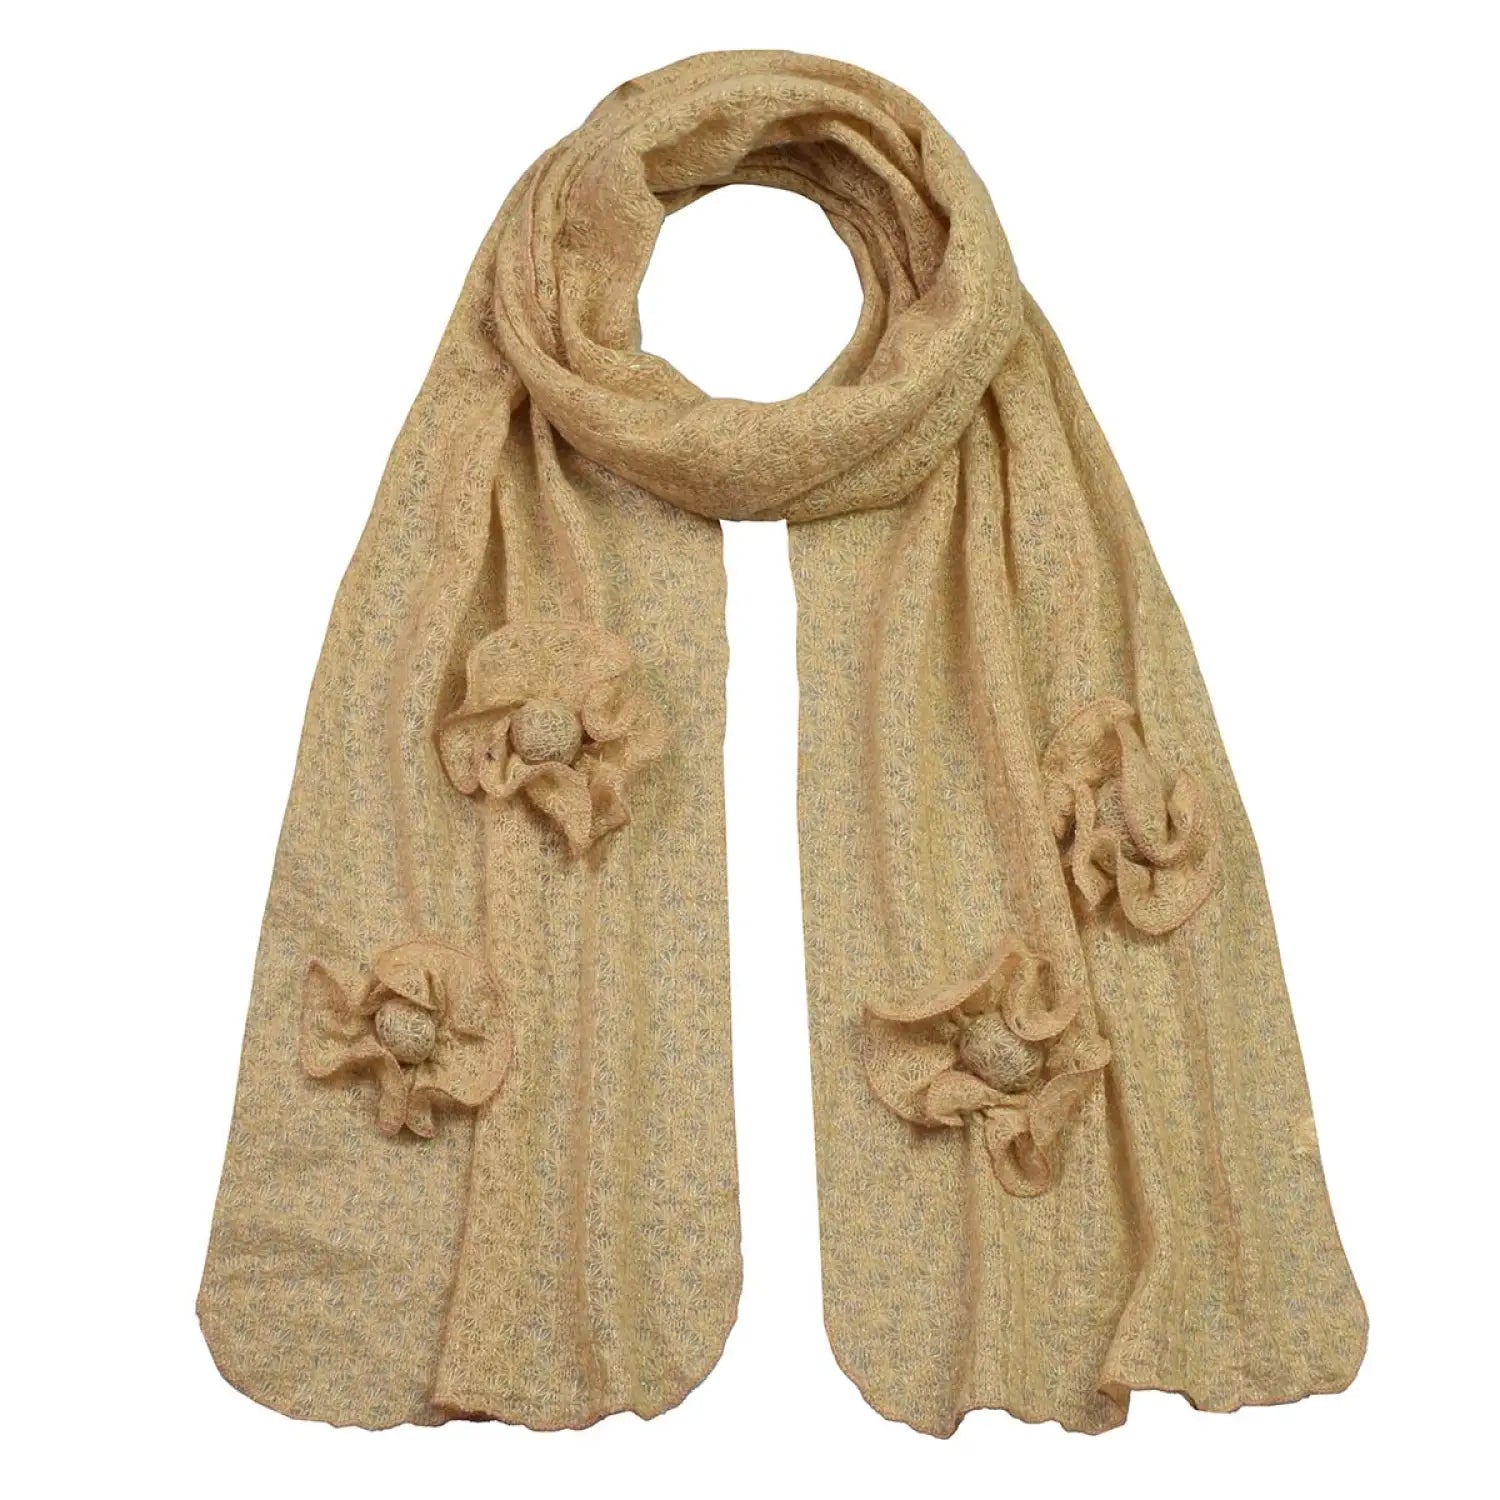 Beige shimmering knitted scarf with flower design